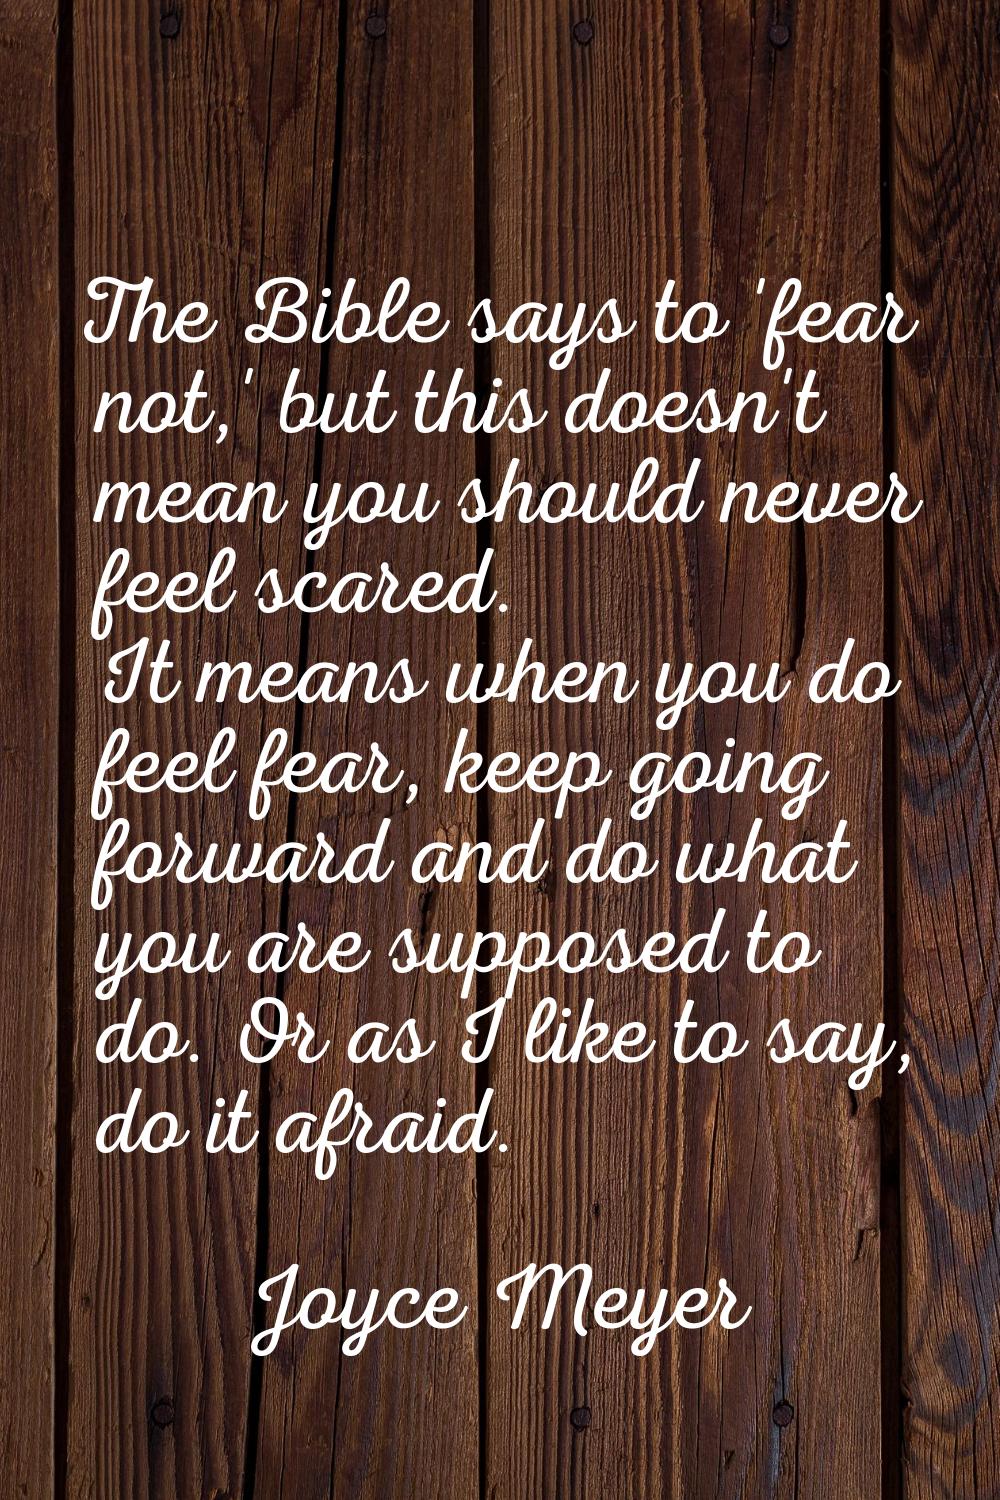 The Bible says to 'fear not,' but this doesn't mean you should never feel scared. It means when you